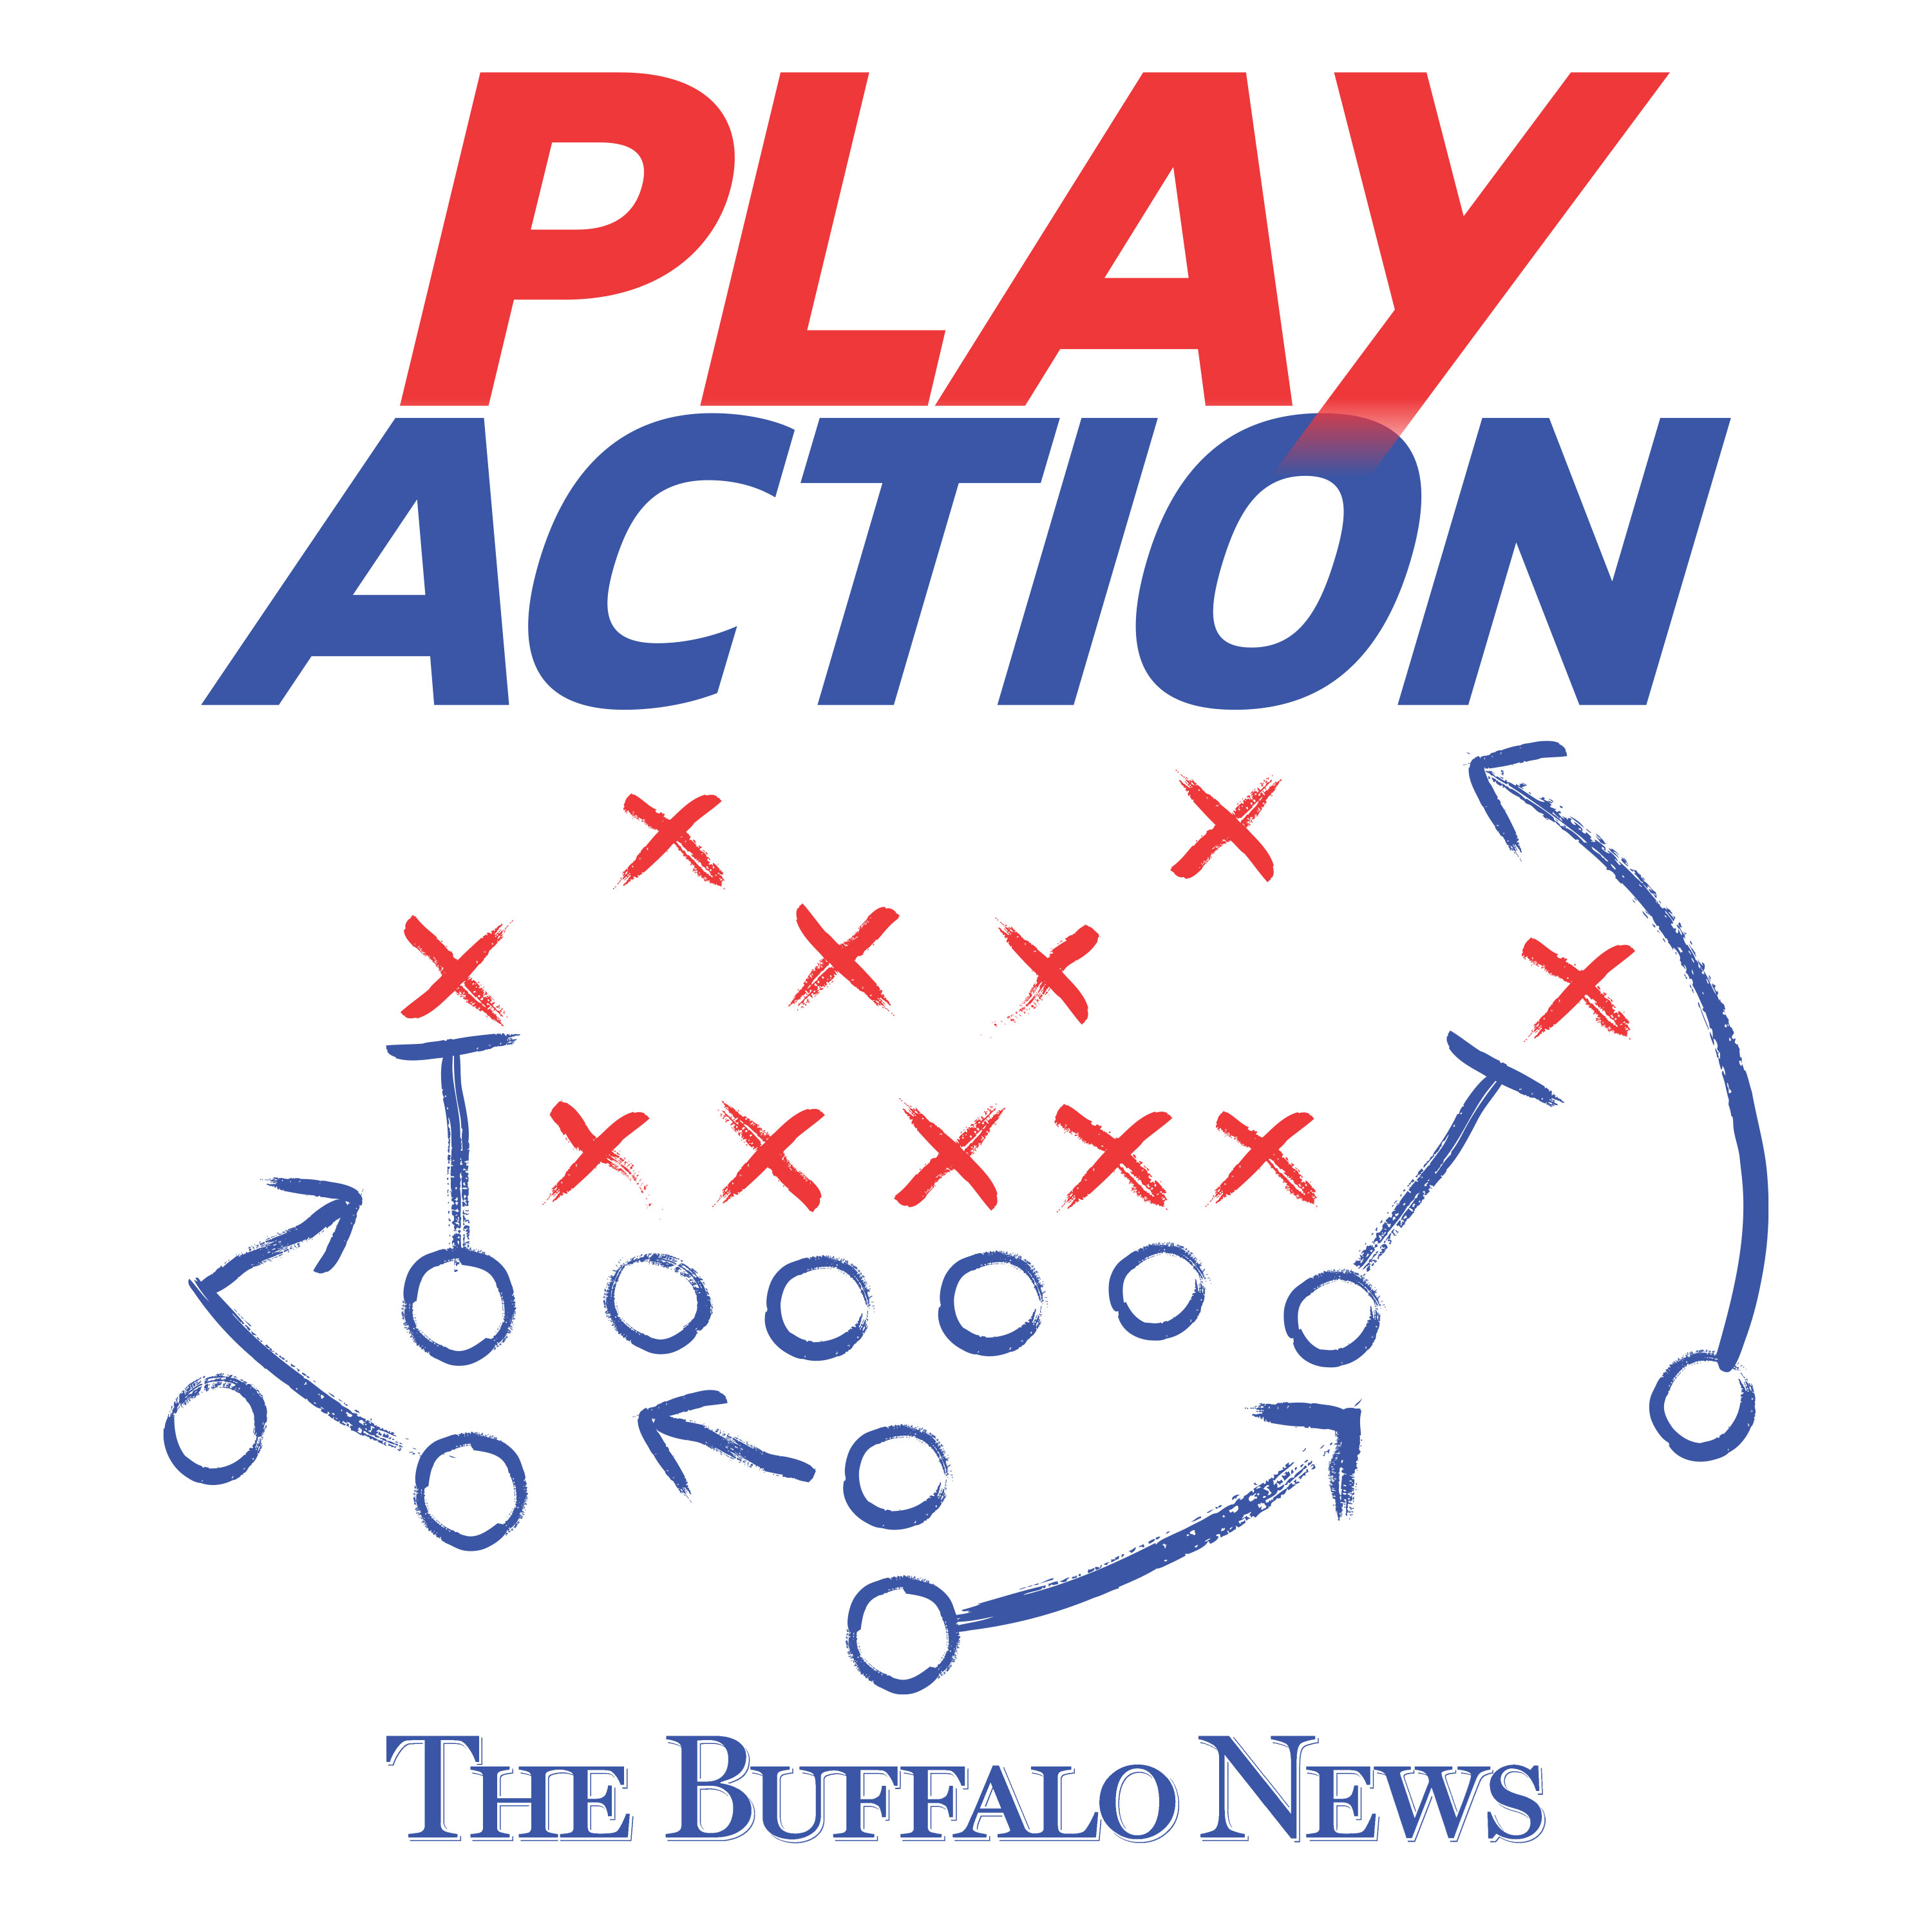 A season defining game for Josh Allen and the Bills offense